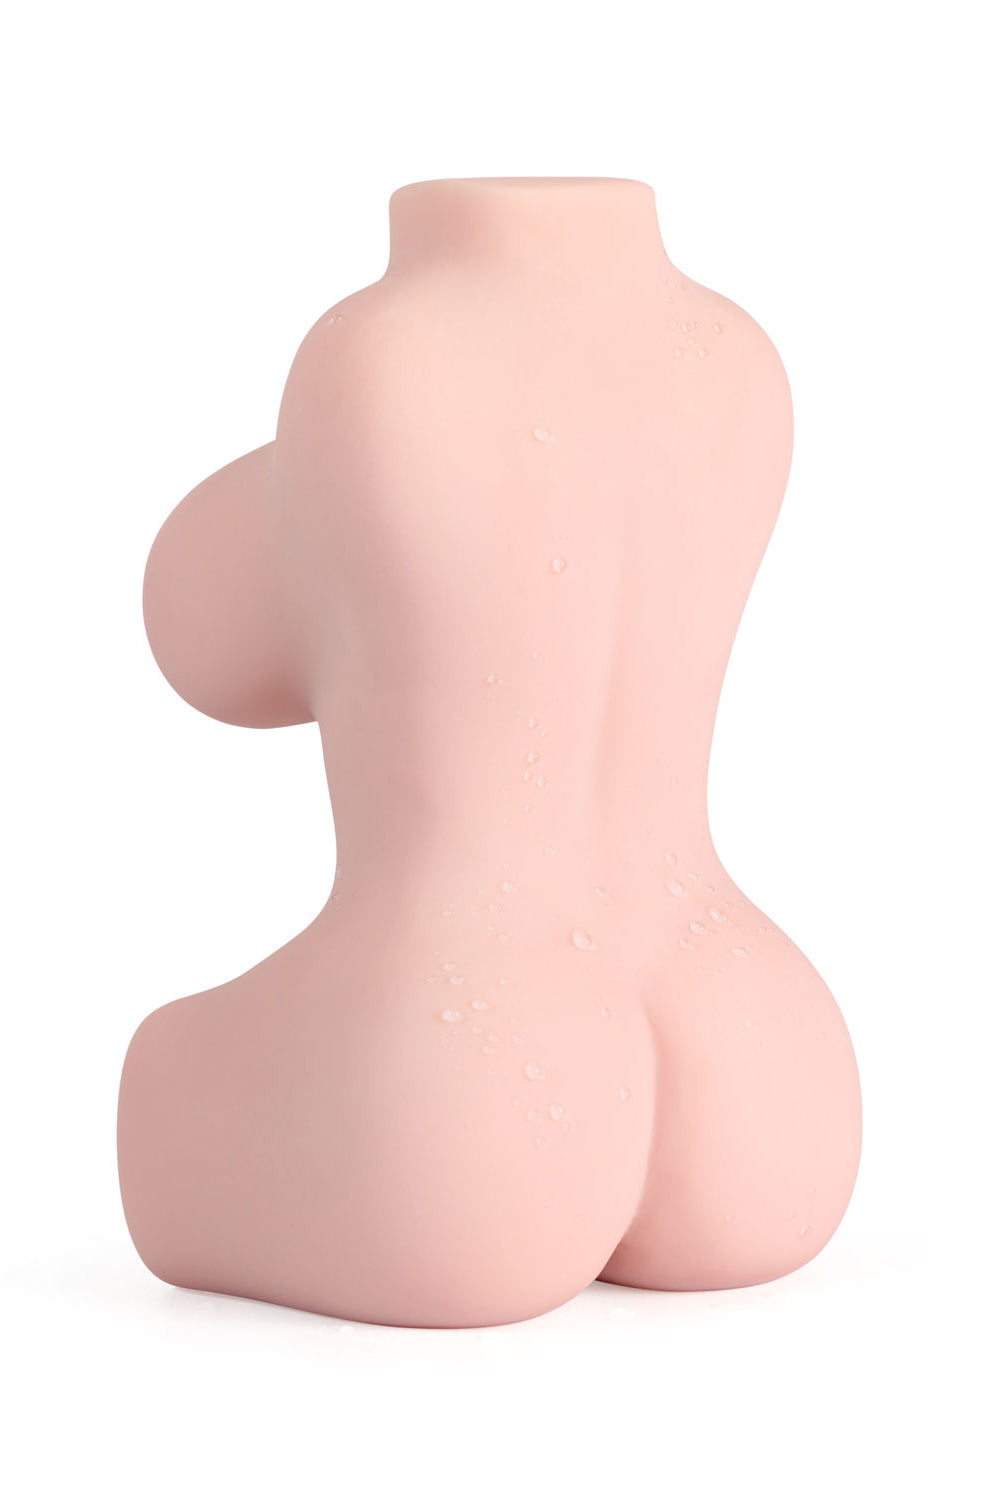 US Stock - 5.5 lbs Lovely TPE Torso Sex Doll Realistic Half Body Adult Love Doll Sex Torso For Man